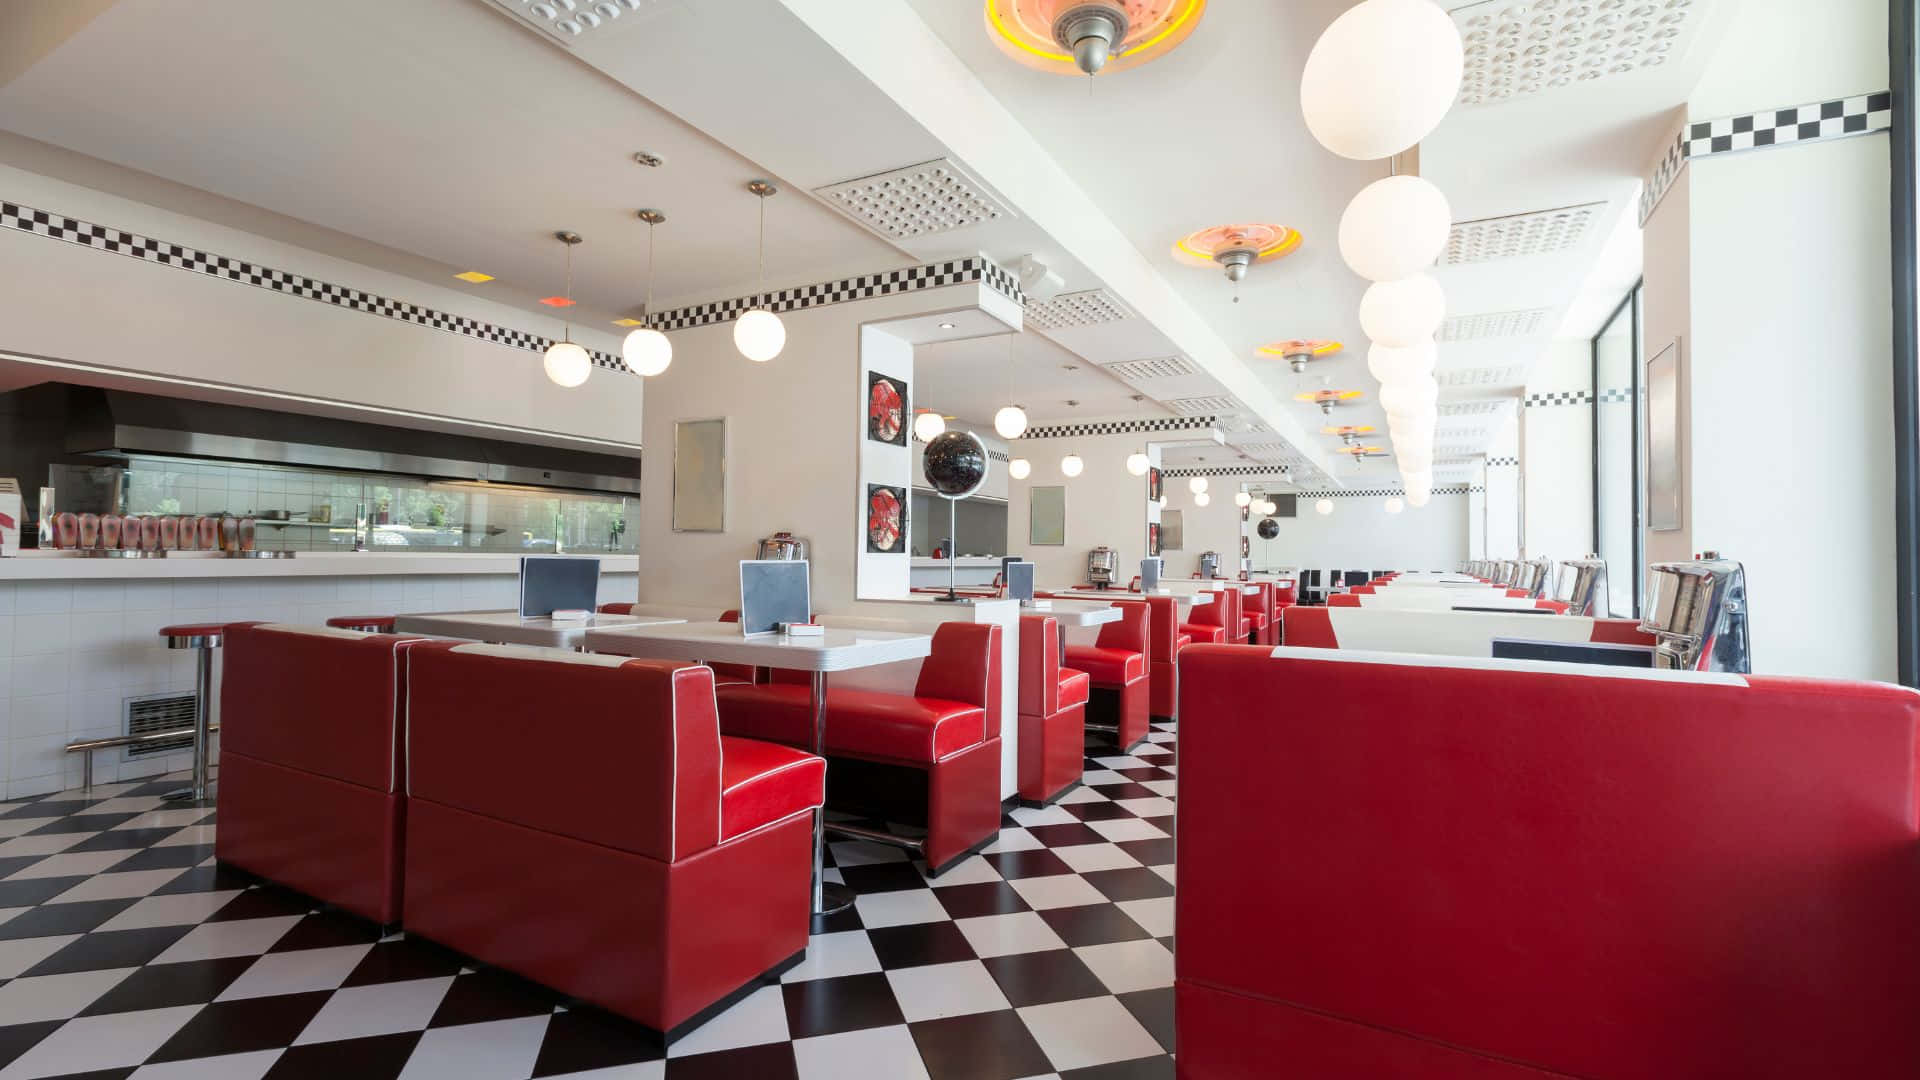 Vintage Diner with Classic 1950s Setting